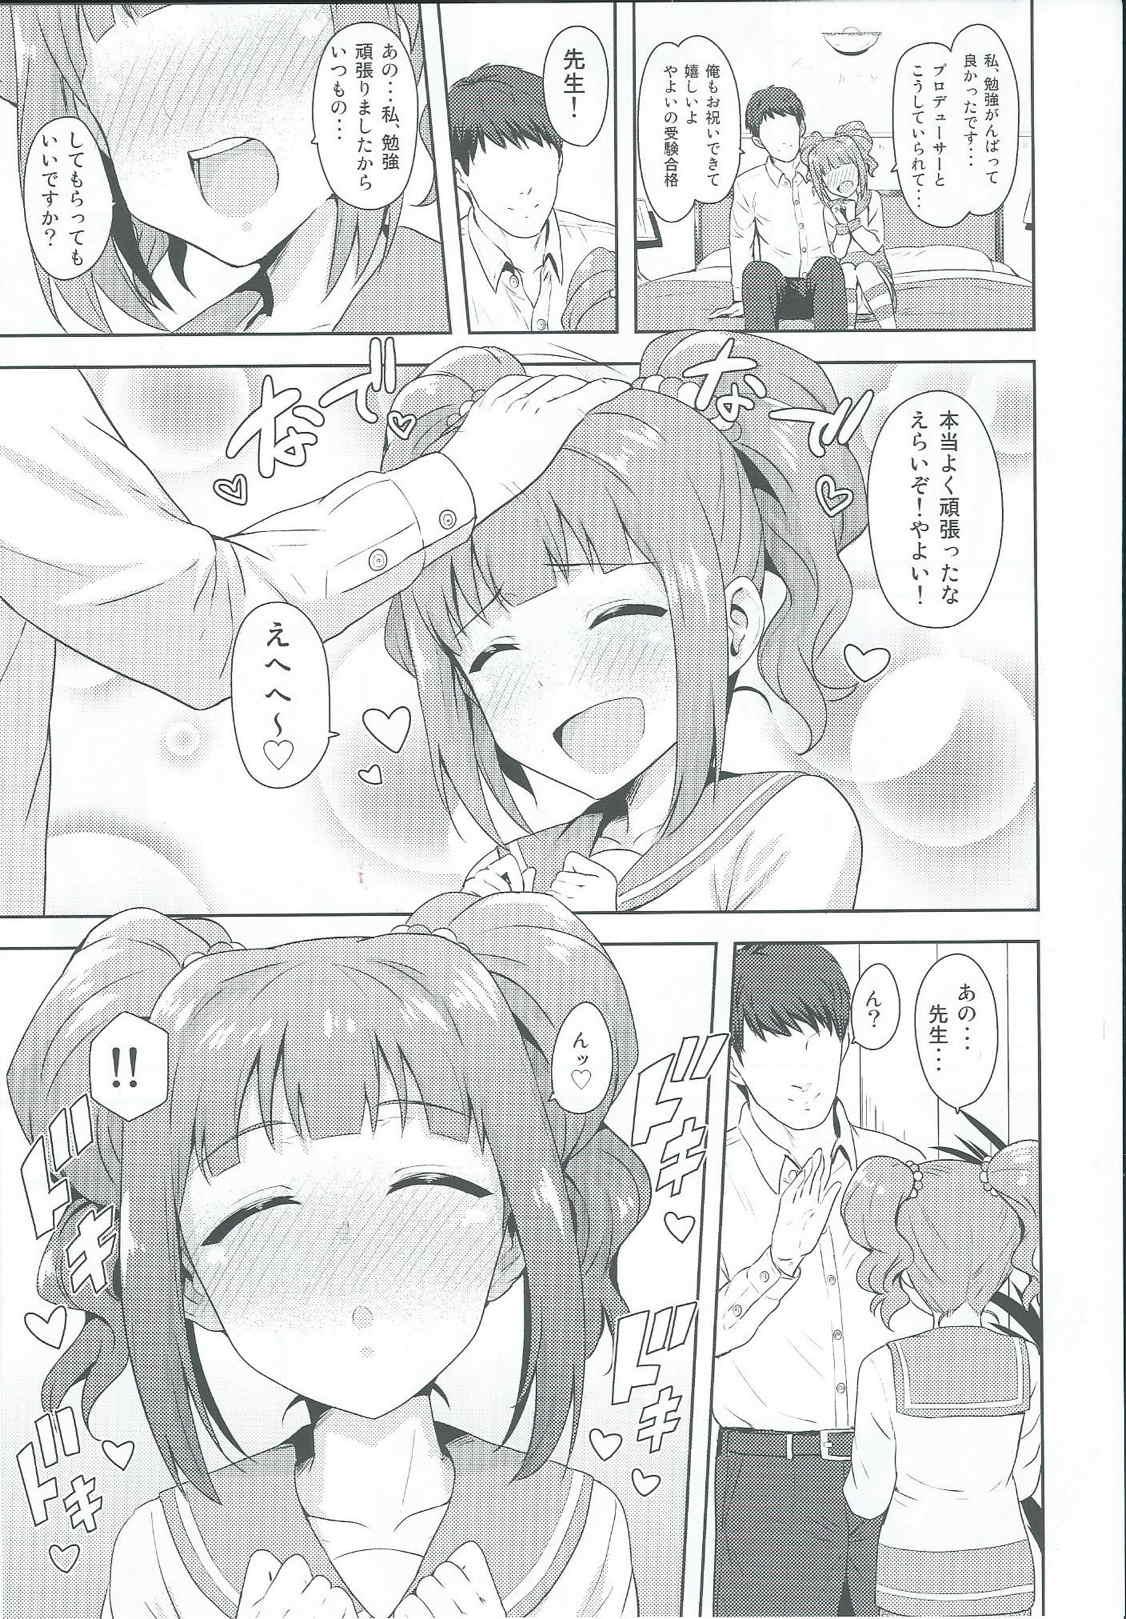 Uncensored Yayoi to Issho 2 - The idolmaster Weird - Page 4